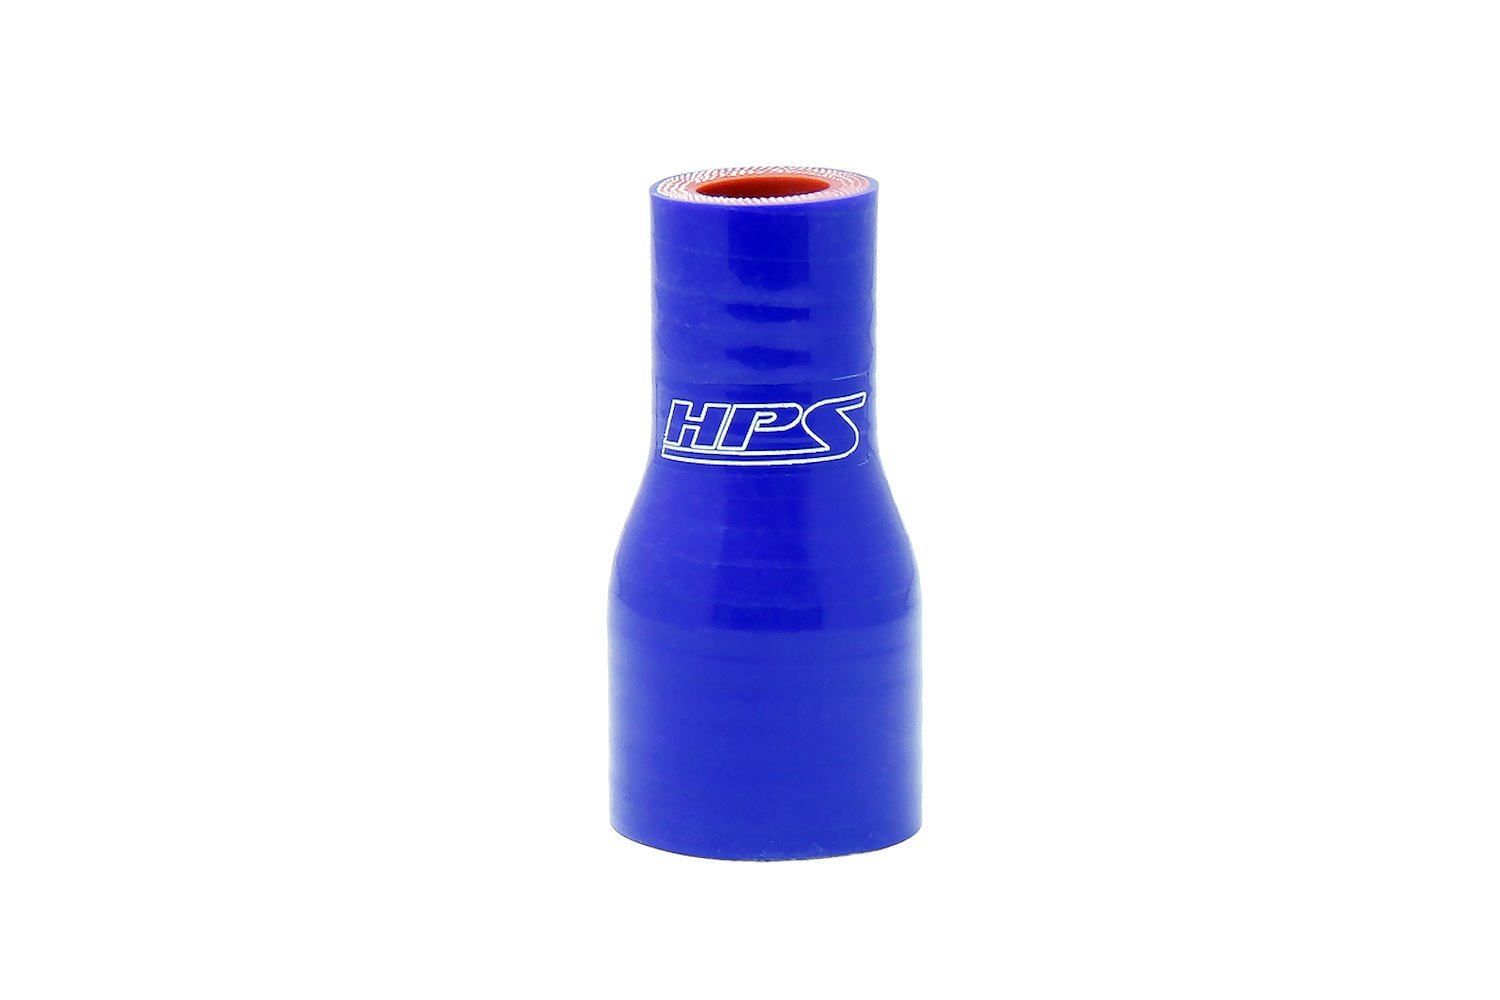 HTSR-125-175-BLUE Silicone Reducer Hose, High-Temp 4-Ply Reinforced, 1-1/4 in. - 1-3/4 in. ID, 3 in. Long, Blue